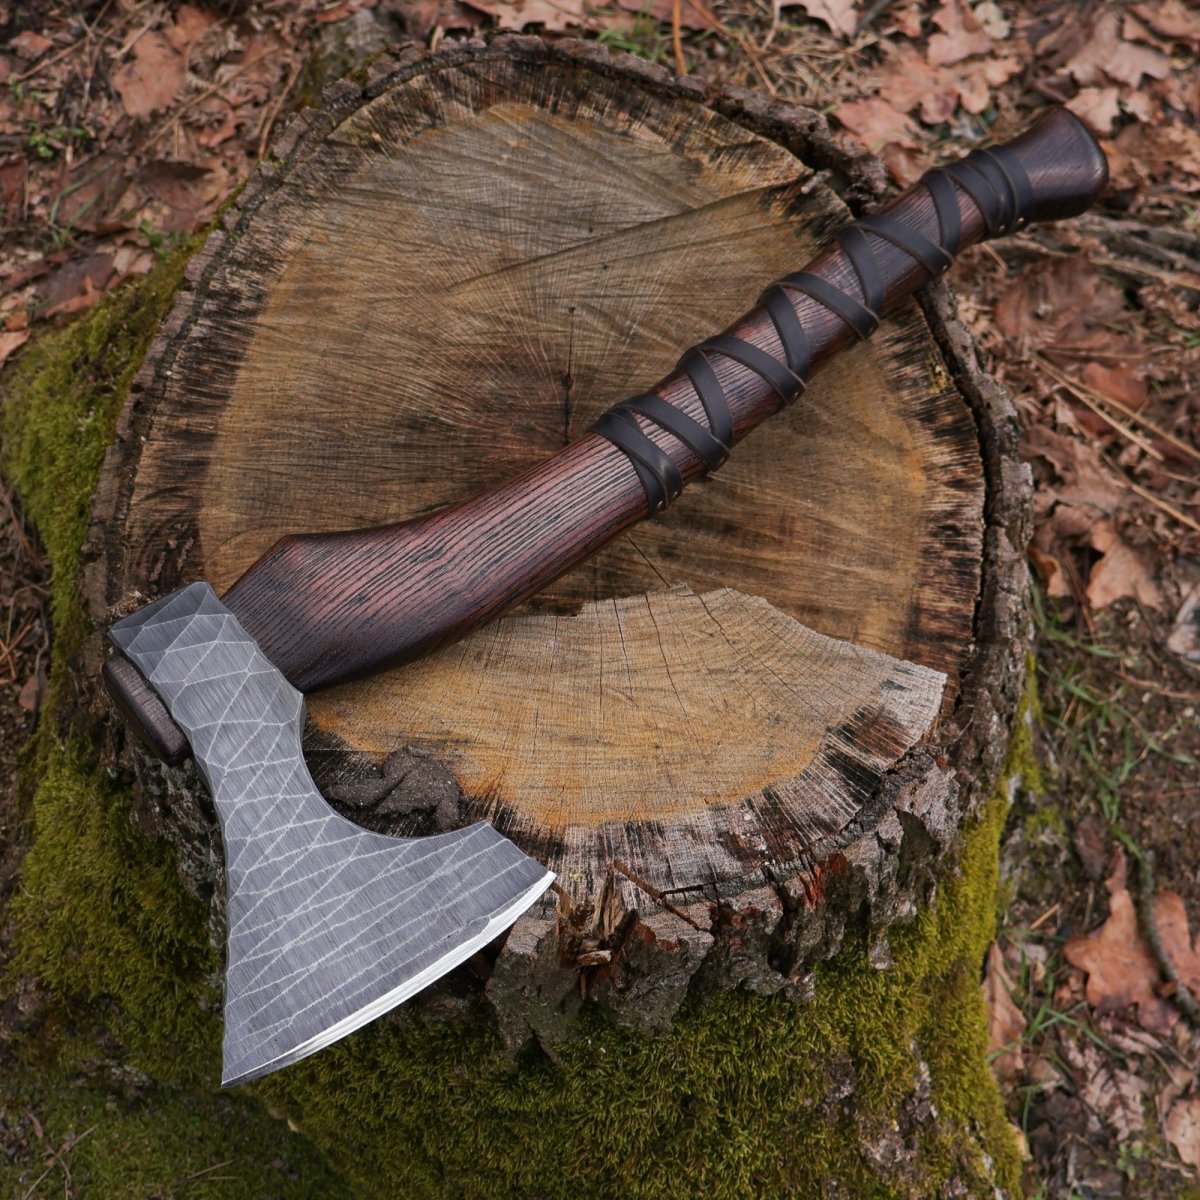 Hand forged axe “Sterk Vorley” with leather cover from AncientSmithy